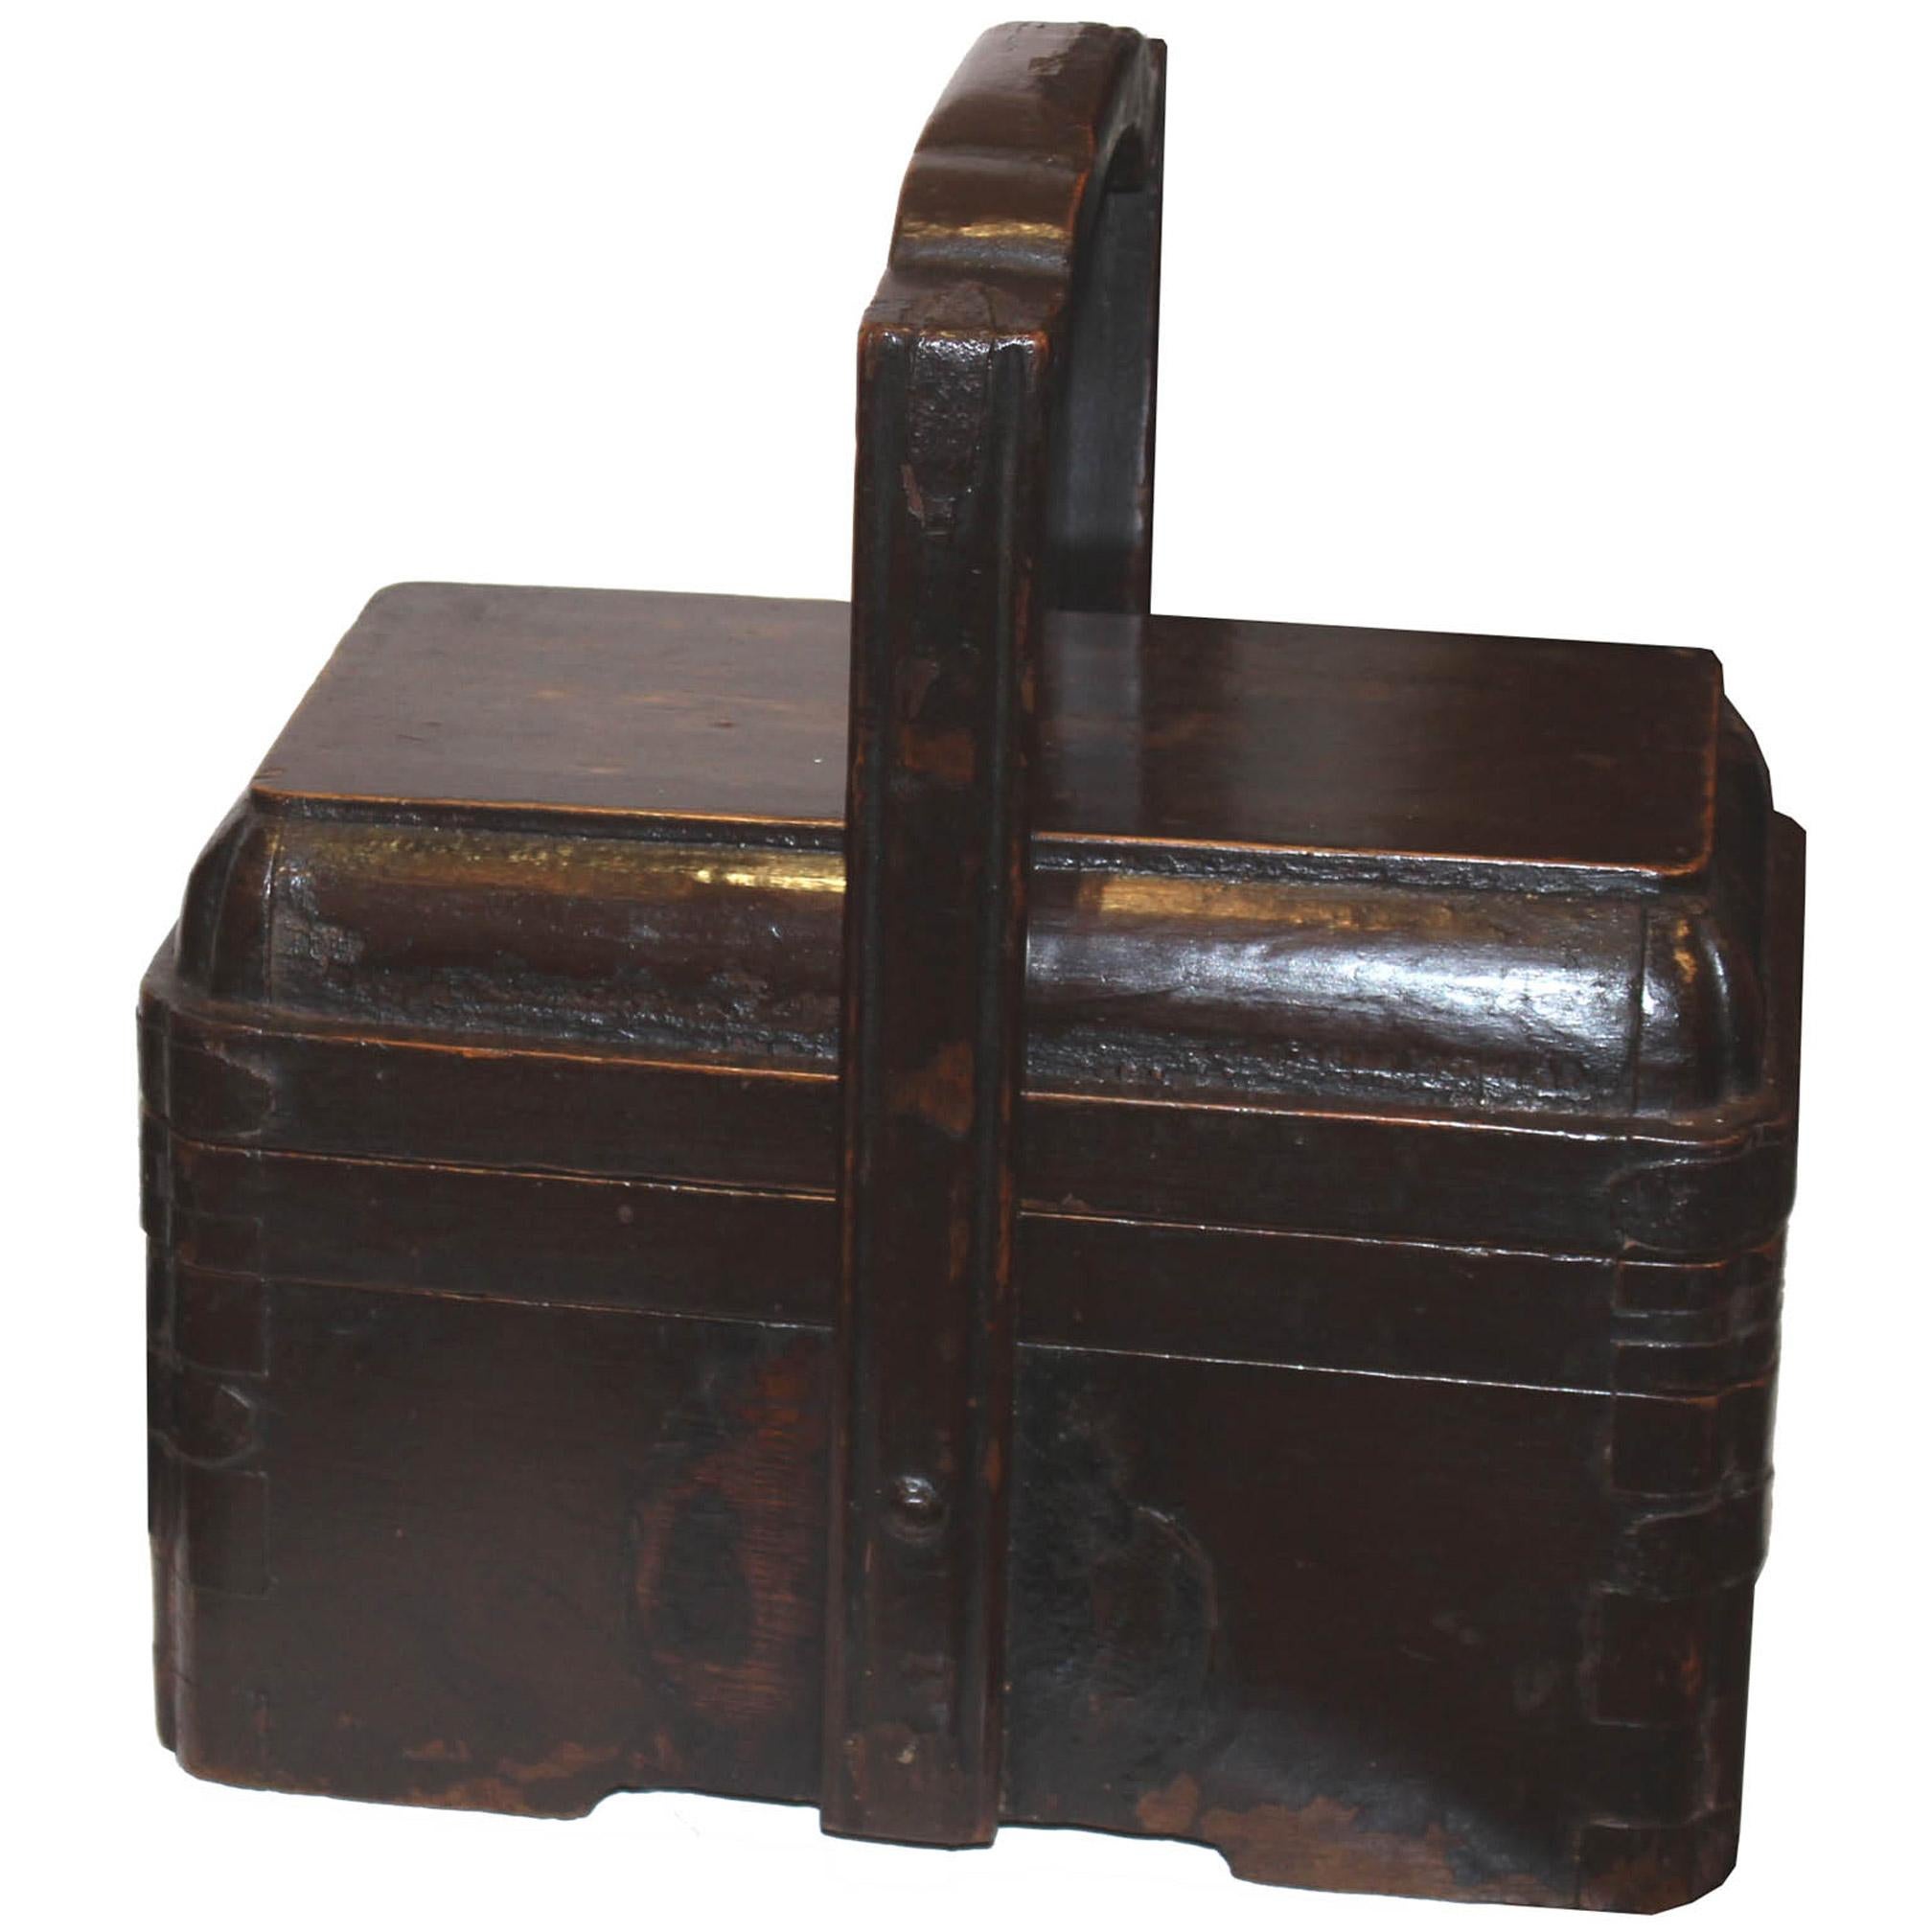 Wood lunch box with handle used to carry food to a temple or ceremonies. Open the lid and place rolled hand towels inside and display on a bathroom counter.